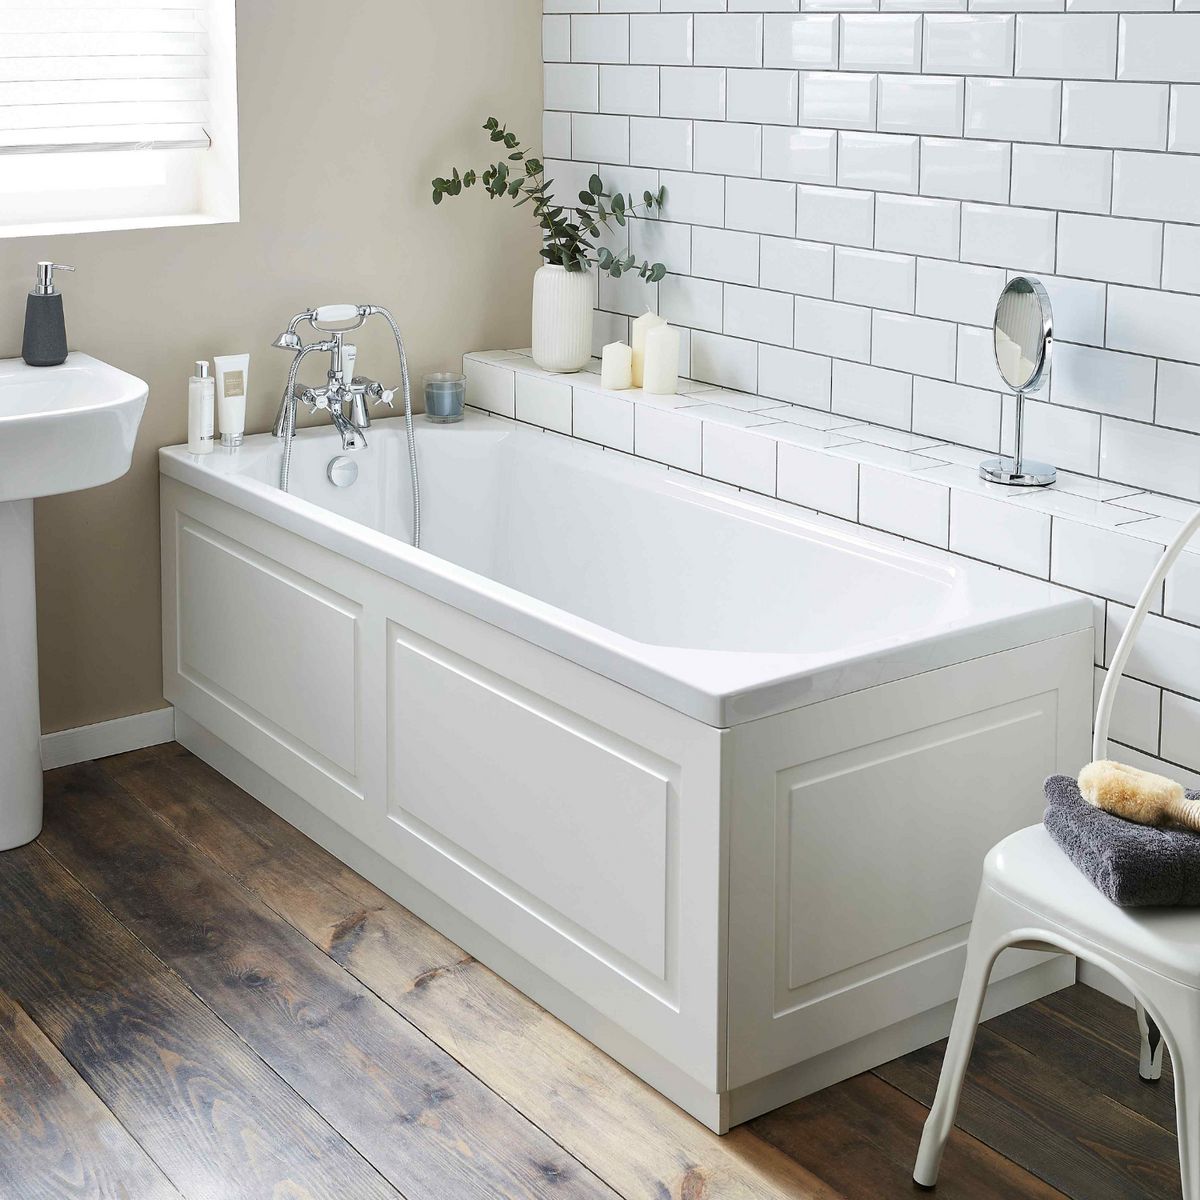 Kartell UK Purity White Gloss Shower Bath Suites with Vanity Unit and Astlea Duo Bath